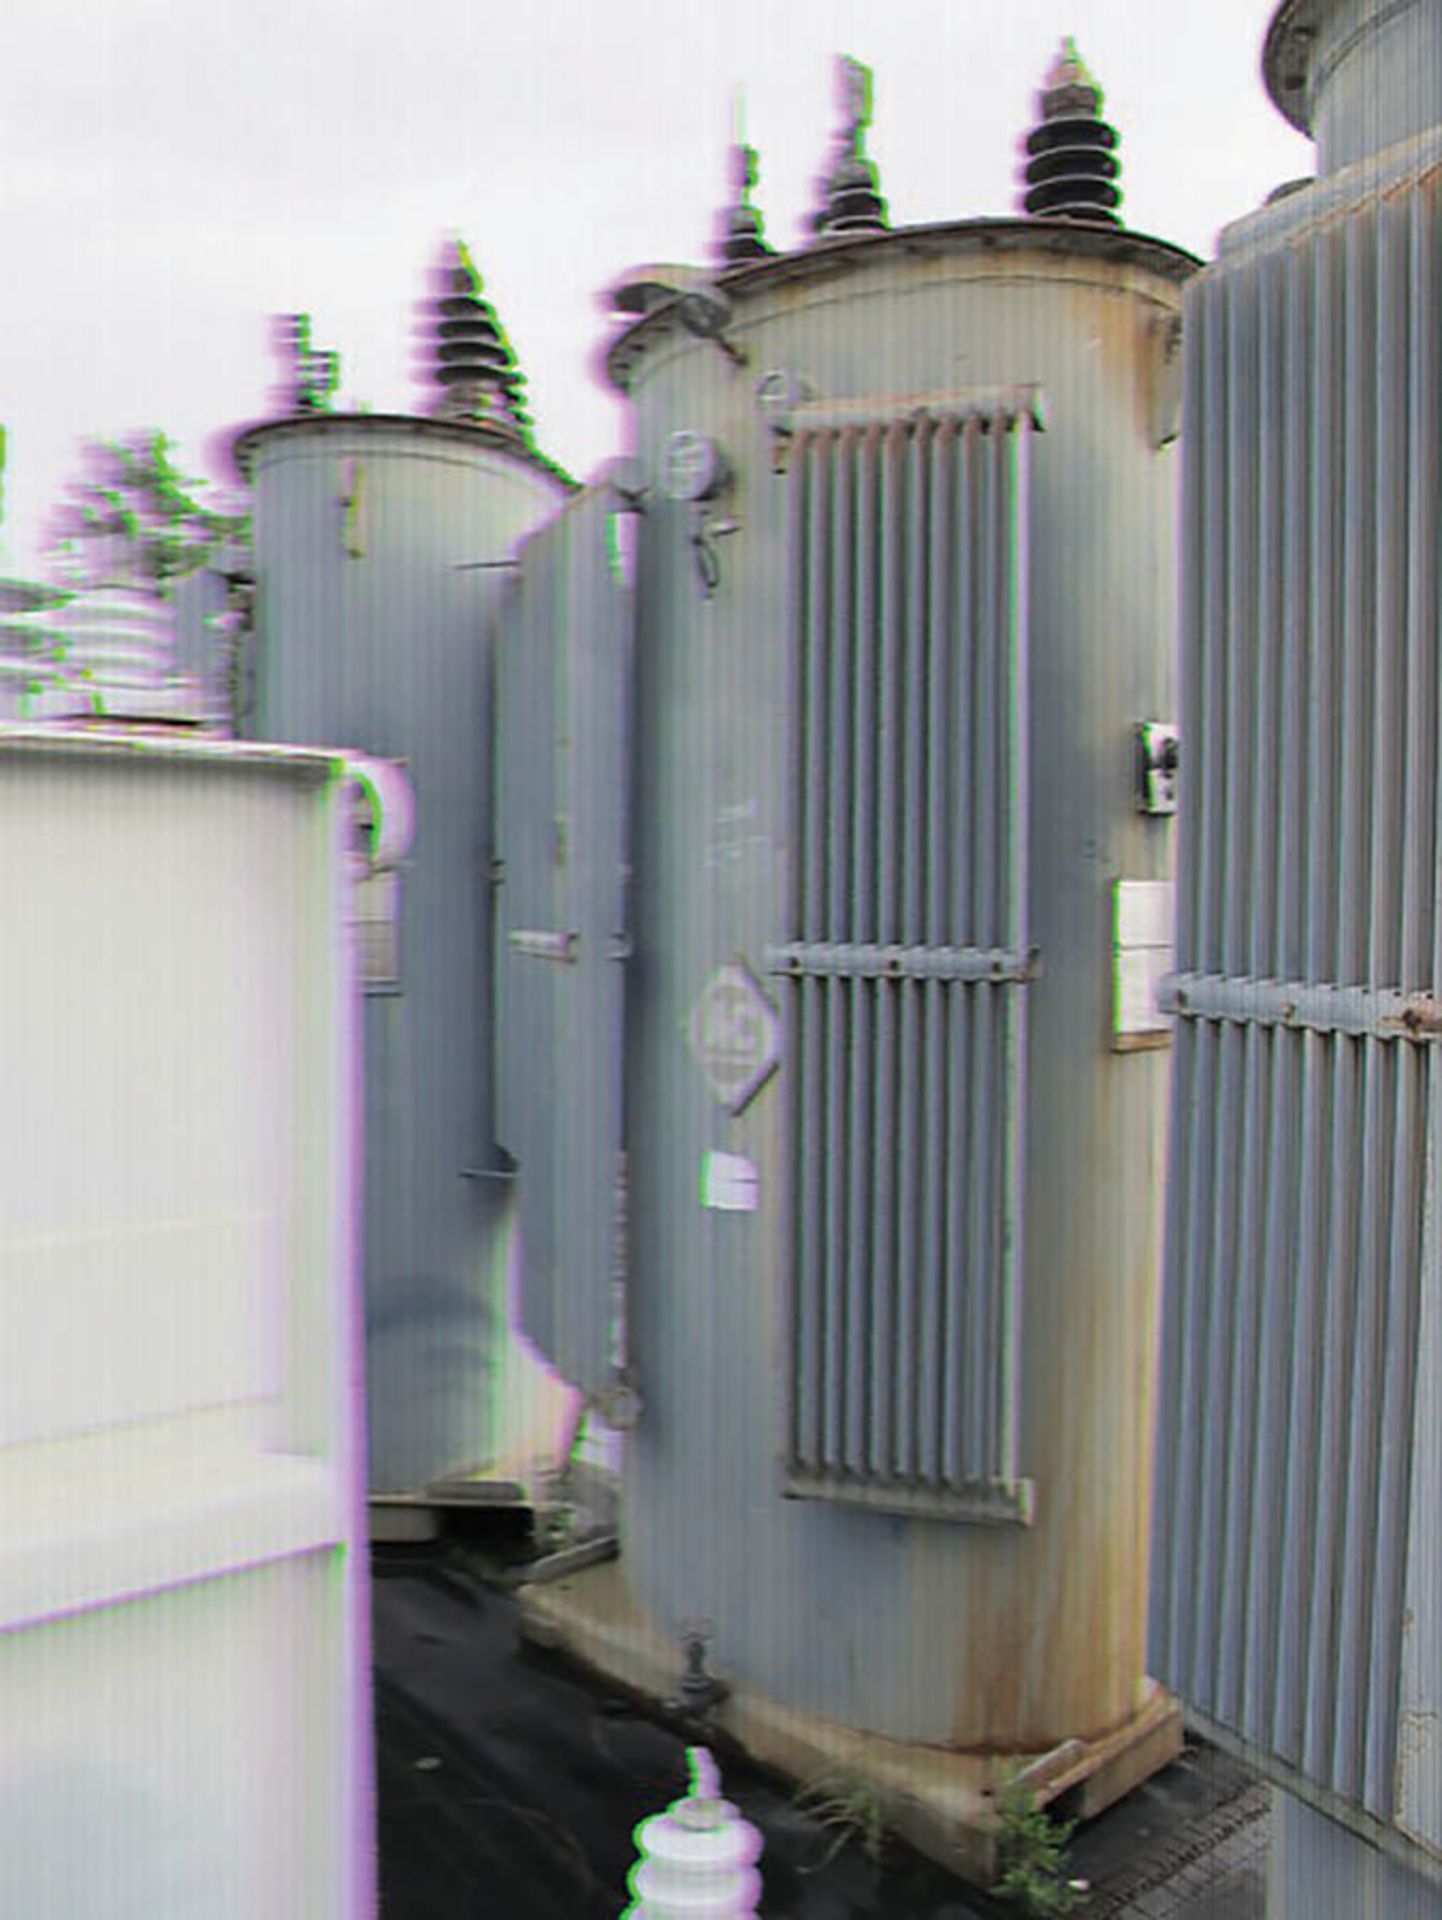 ALLIS CHALMERS 833 KVA CONTINUOUS SINGLE PHASE TRANSFORMER, S/N 2650976, 34,500 HV., 2,400 LV., 156 - Image 4 of 4